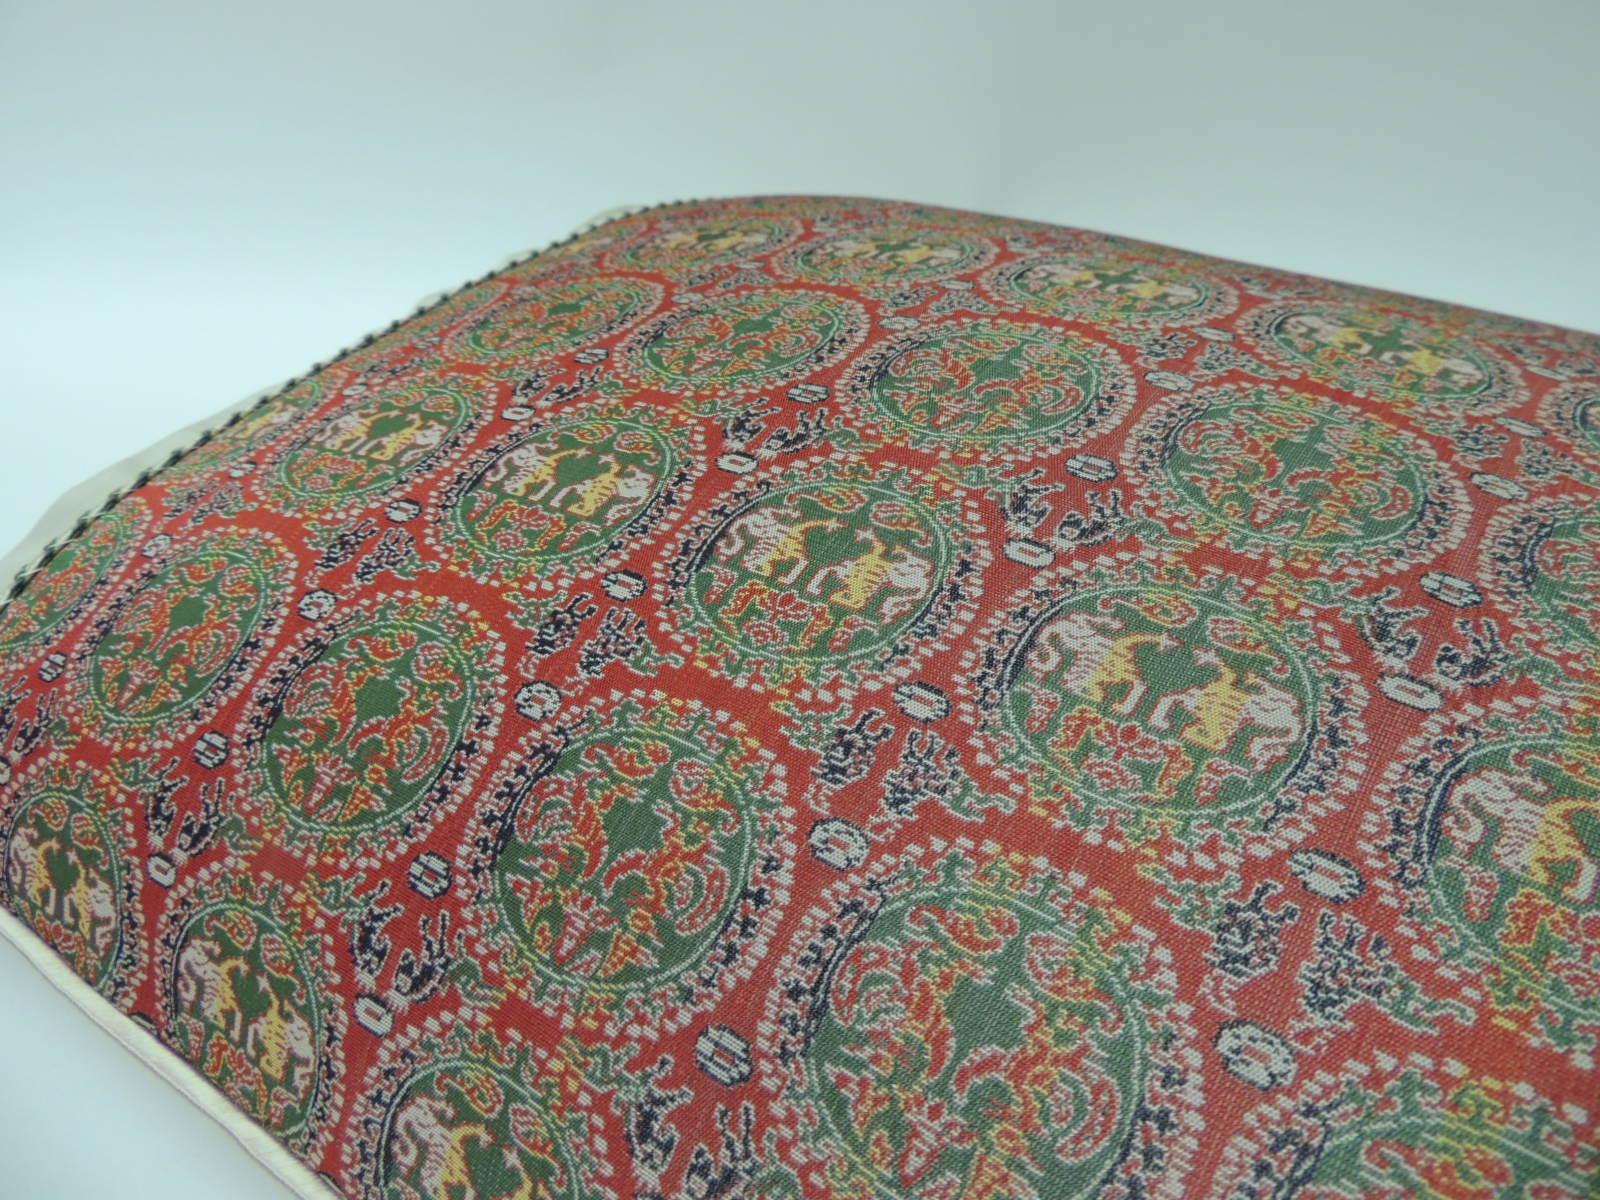 Japanese Brocade with Circular Design of Tigers and Phoenixes Bolster Decorative Pillow